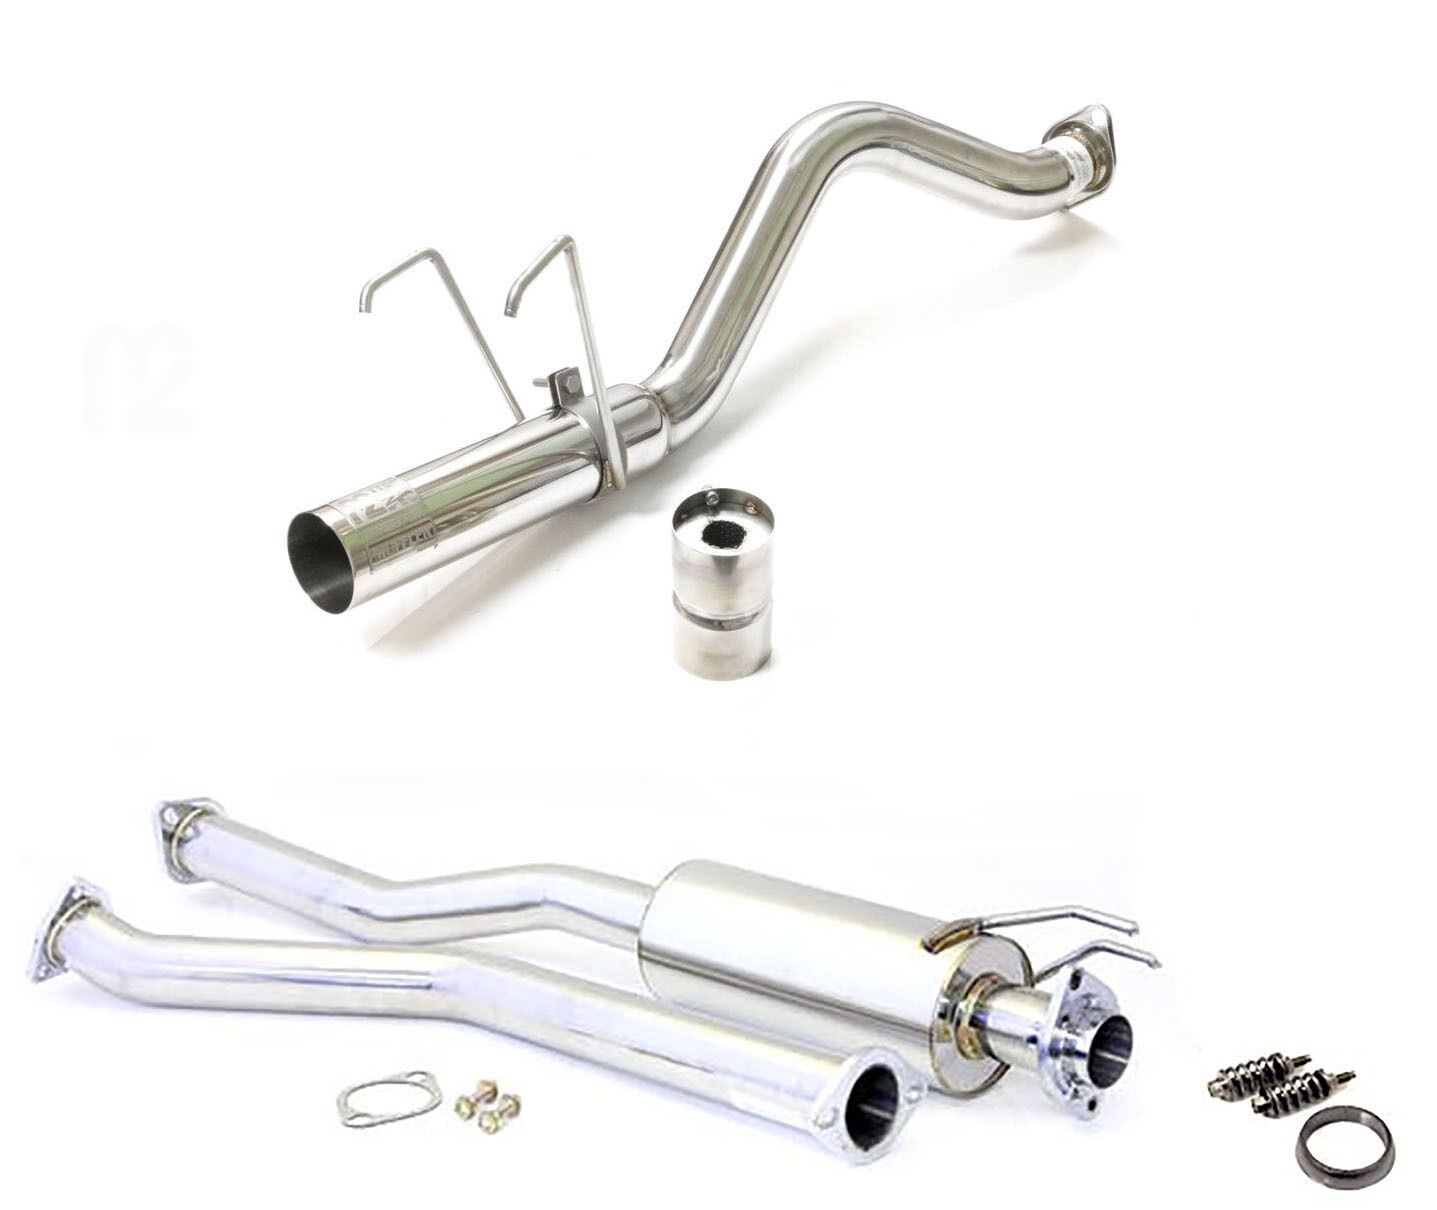 M2 HONDA CIVIC SPORT EP2 EP1 HORNET CAT BACK STAINLES STEEL EXHAUST SYSTEM Y3181